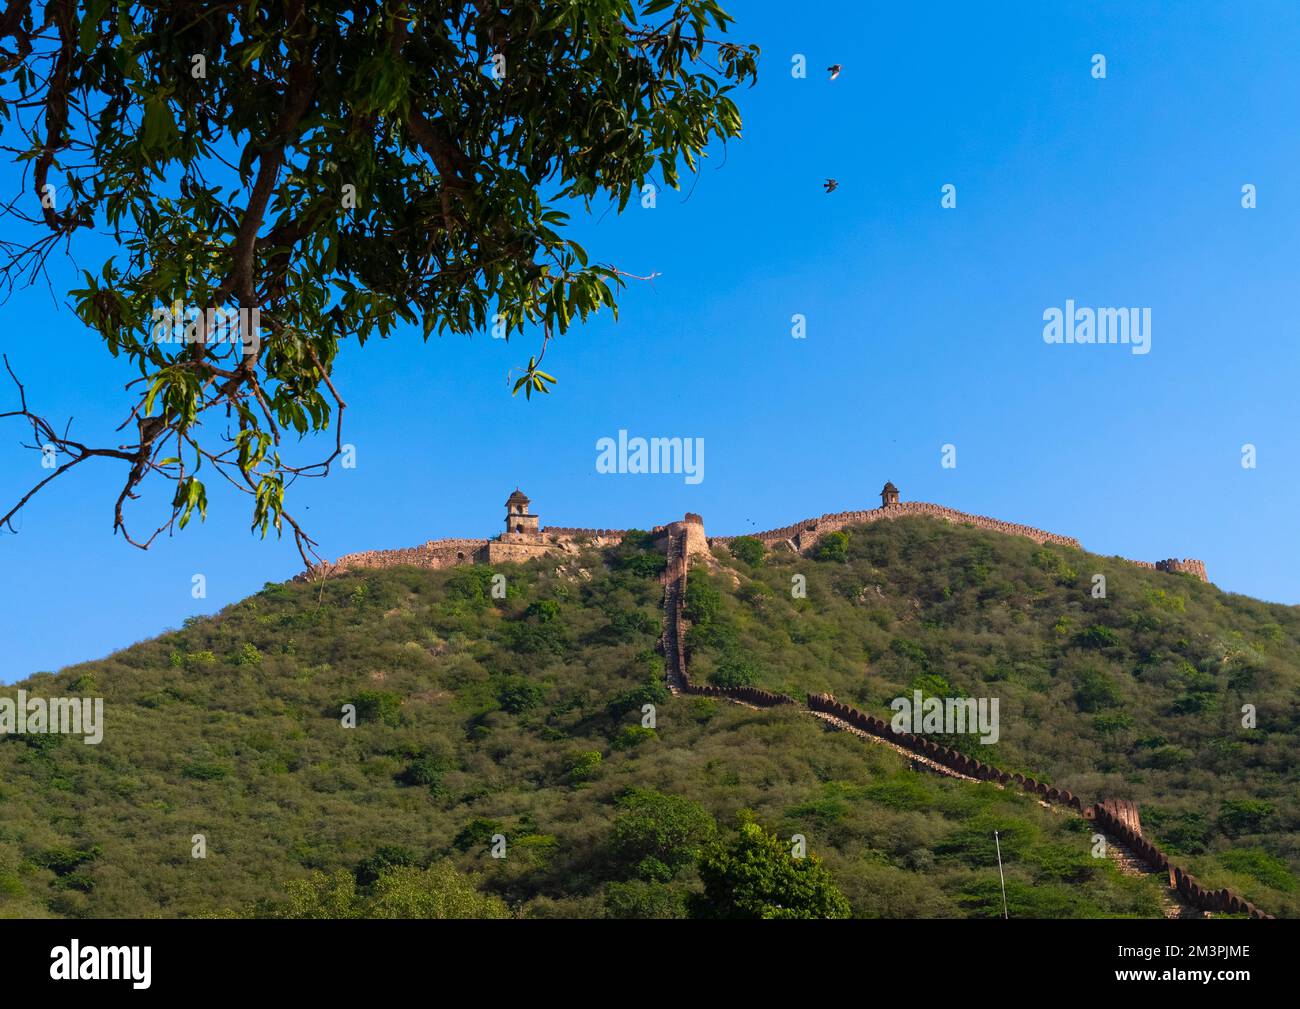 The long wall surrounding Amber fort, Rajasthan, Amer, India Stock Photo